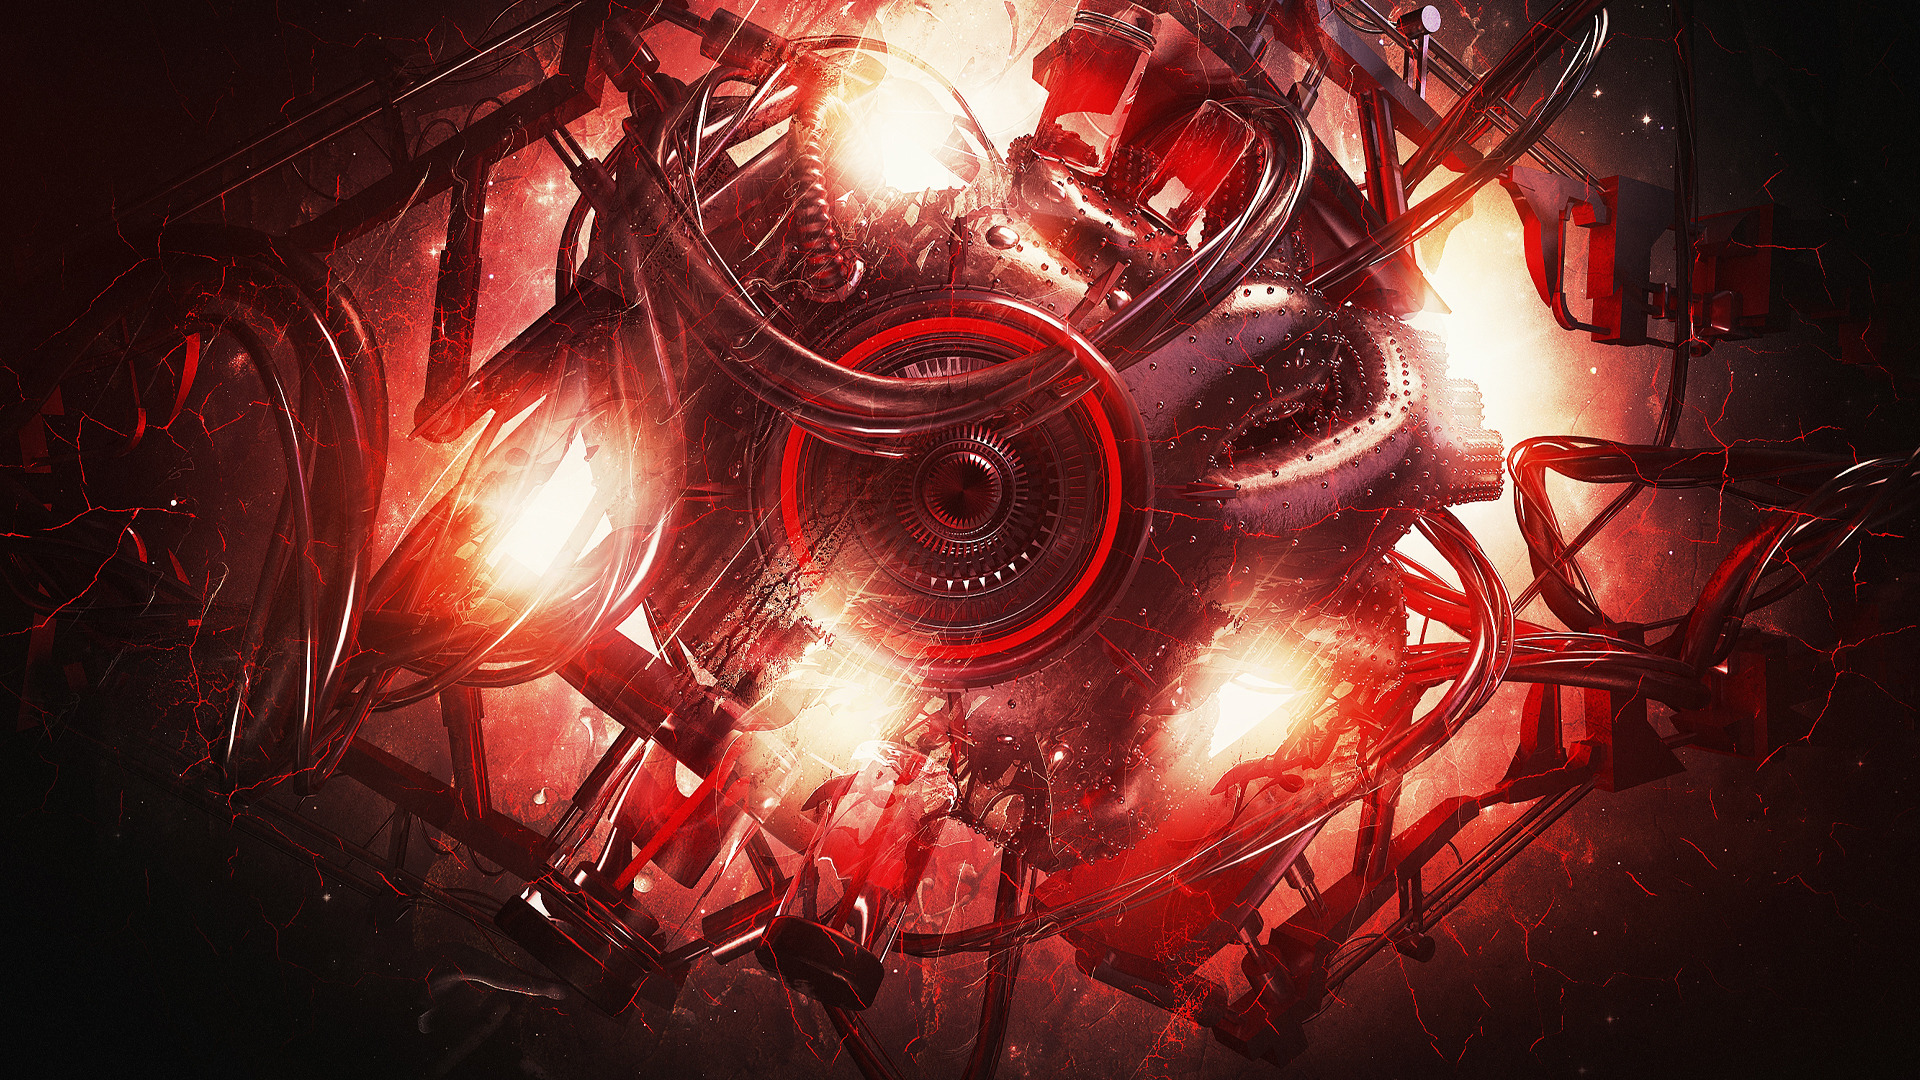 Lacza, Digital Art, Abstract, Sphere, Glowing, Red, Machine, Pipes, Circle, 3D Wallpaper